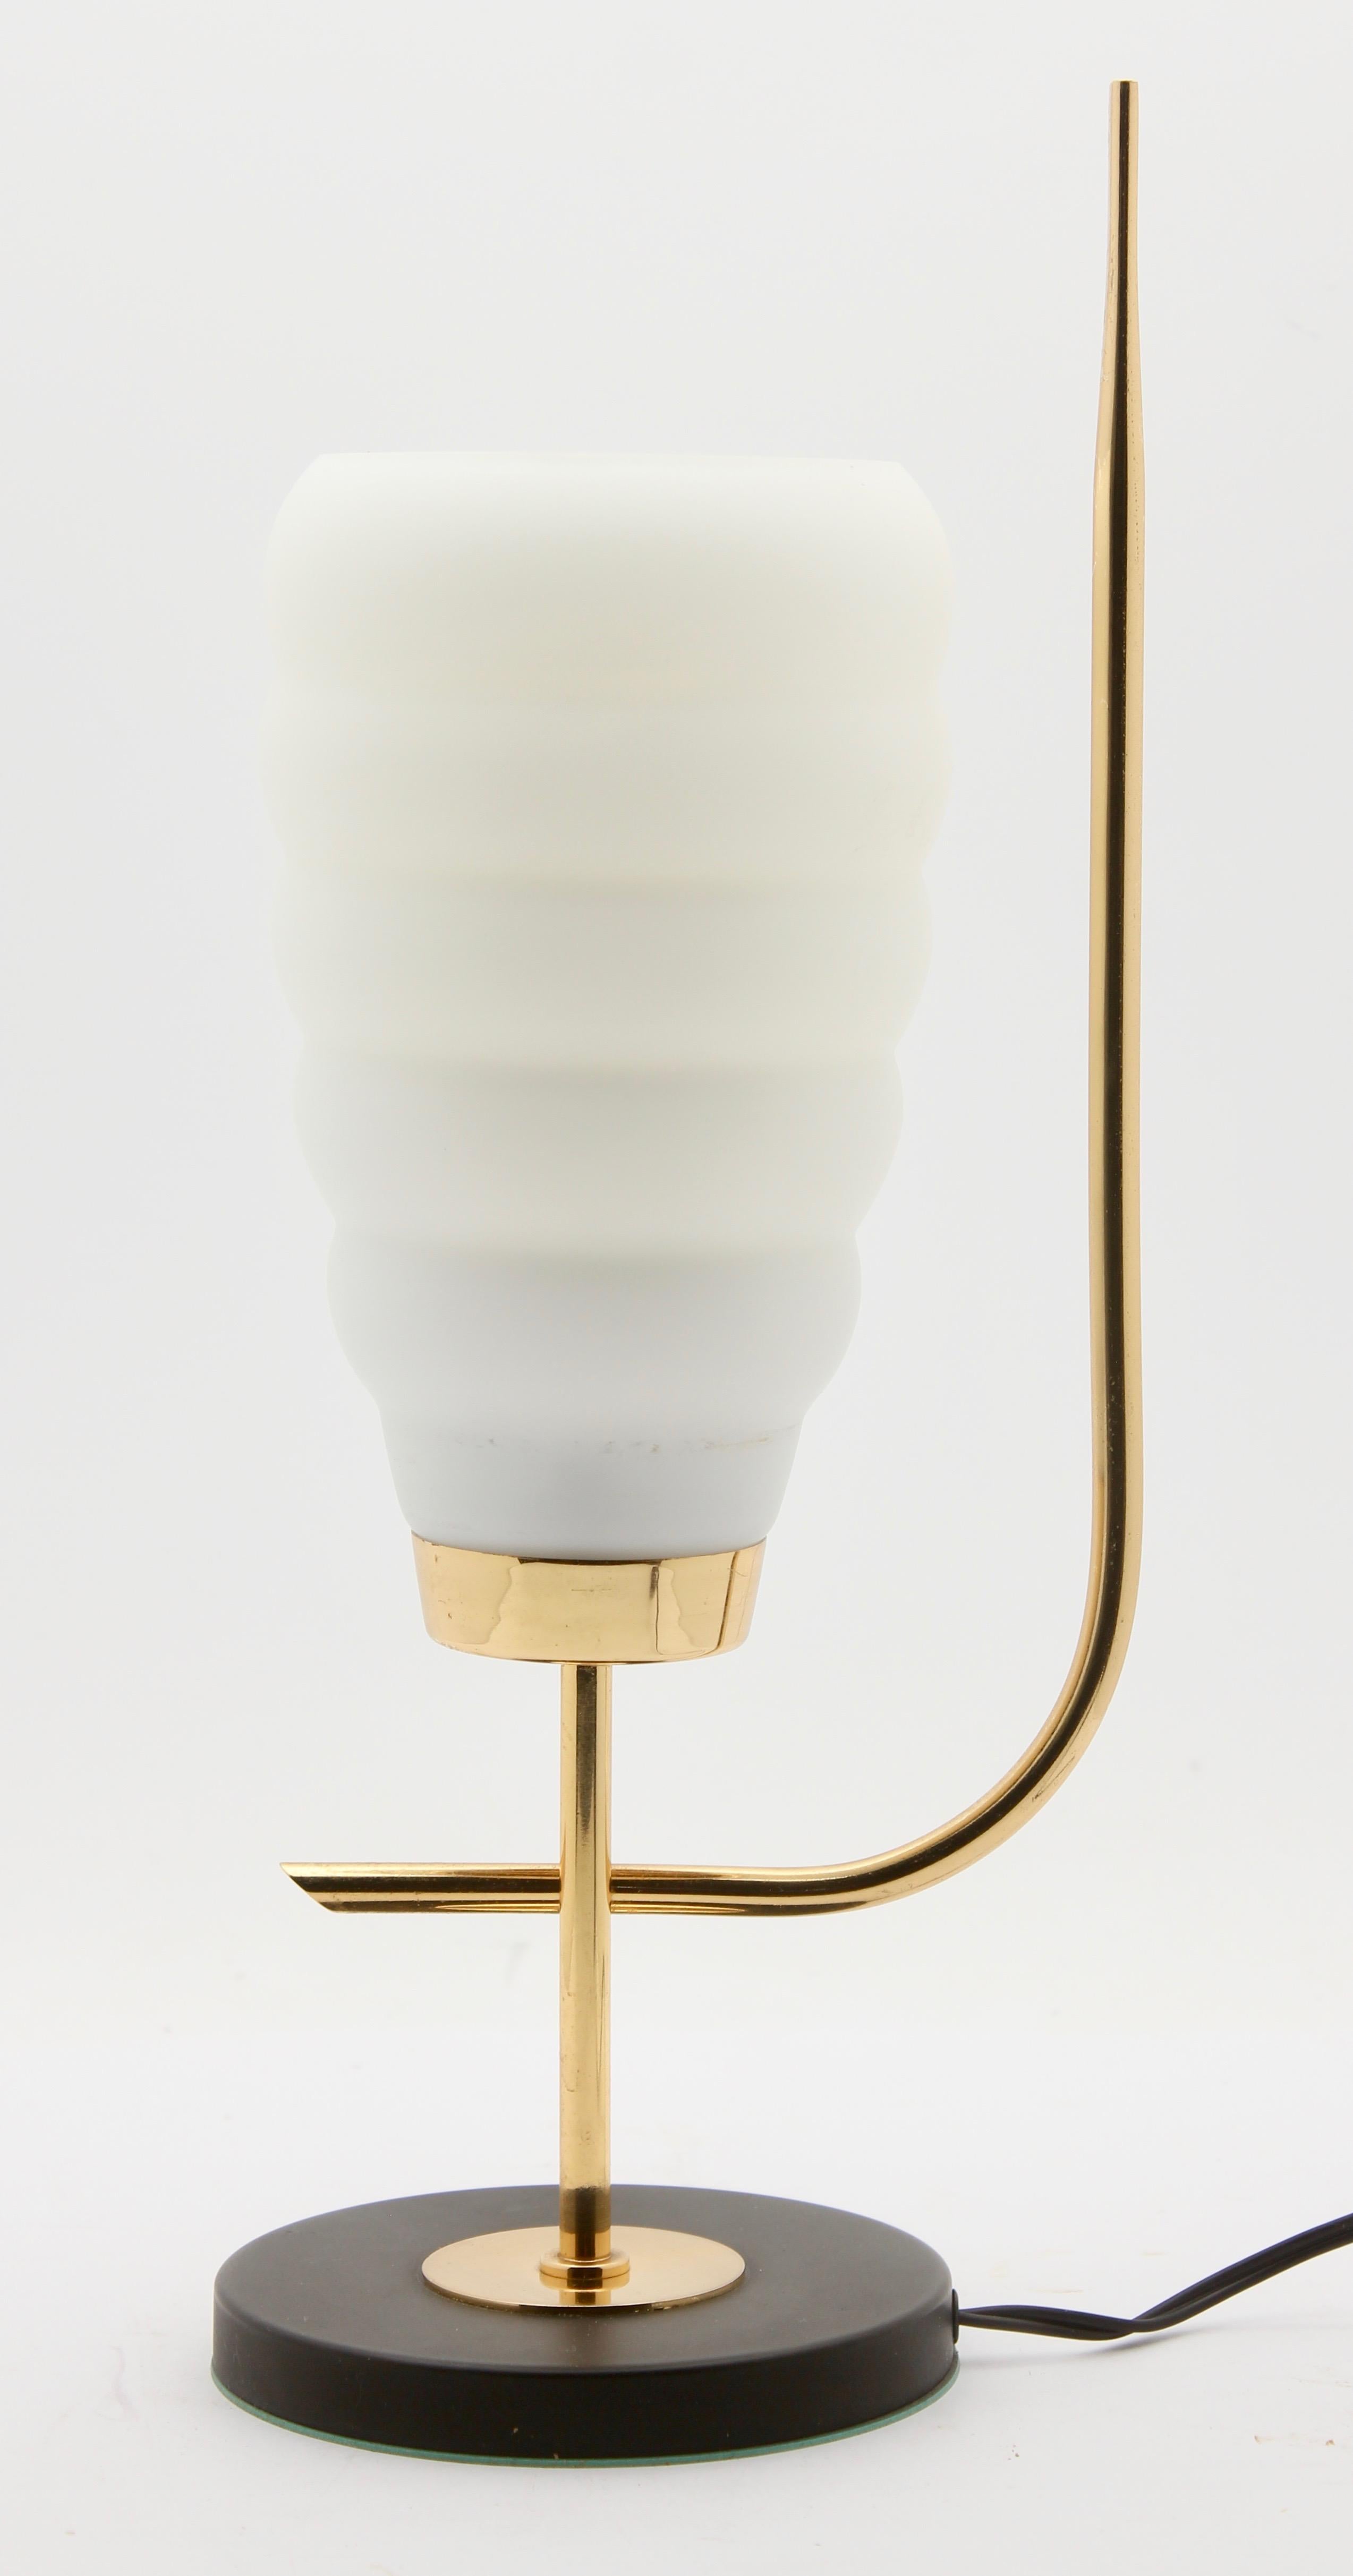 Italian Scandinavian Design Table Lamp with Milk-White Glass Shade and Brass Mounts